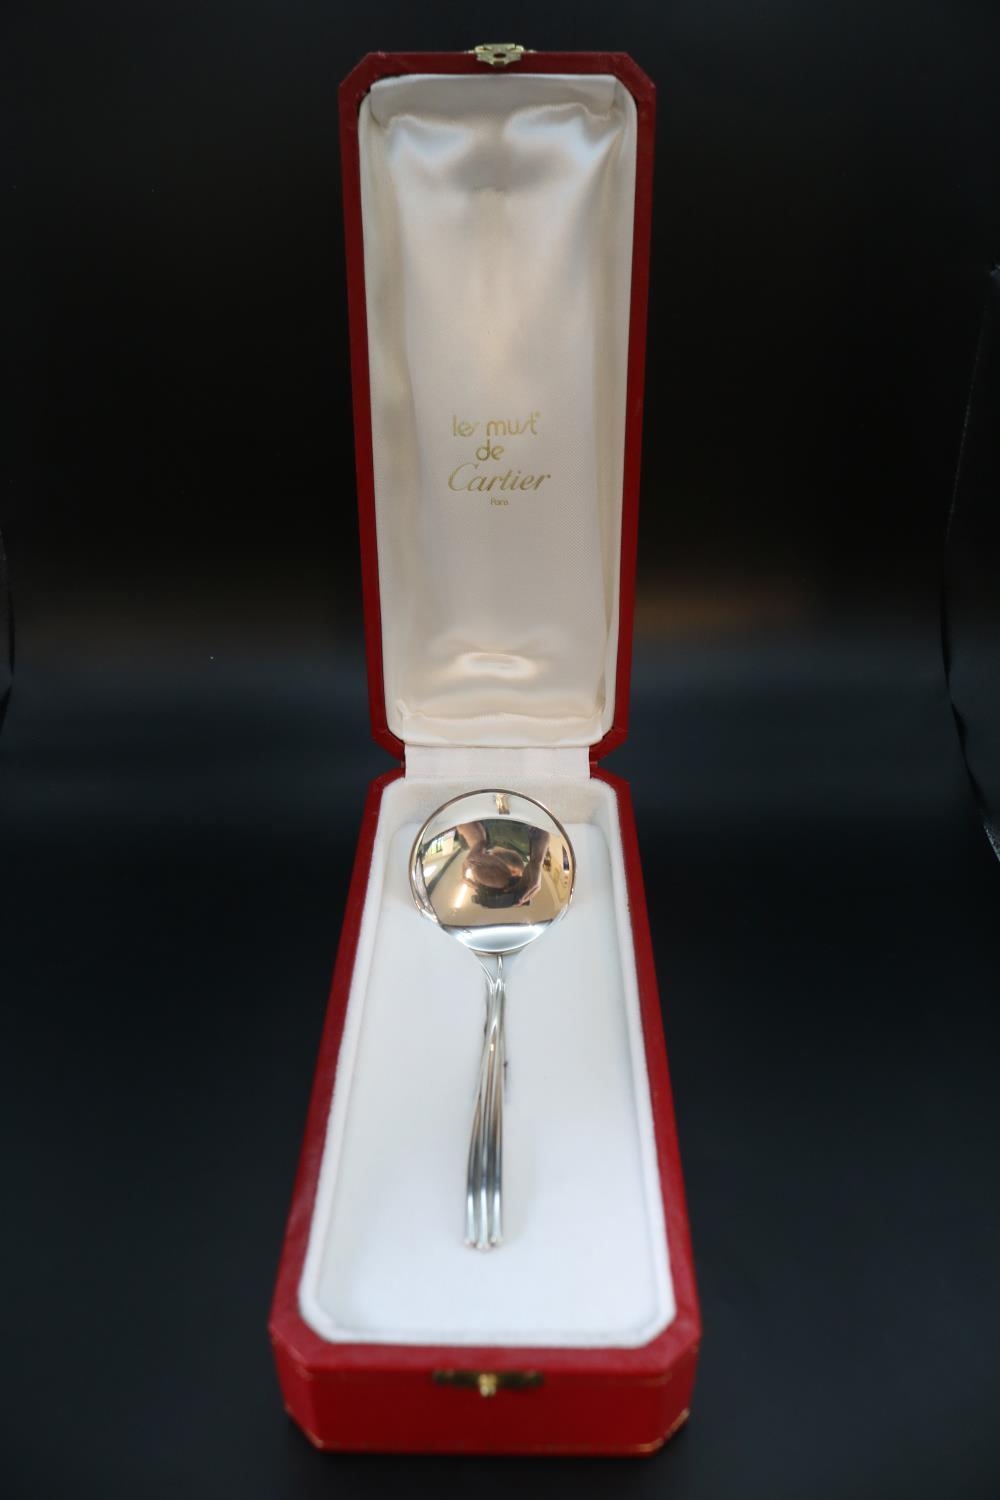 Cartier of Paris. Les Must de Cartier Paris Silver tasting Spoon with reeded handle 51g in weight in - Image 2 of 4